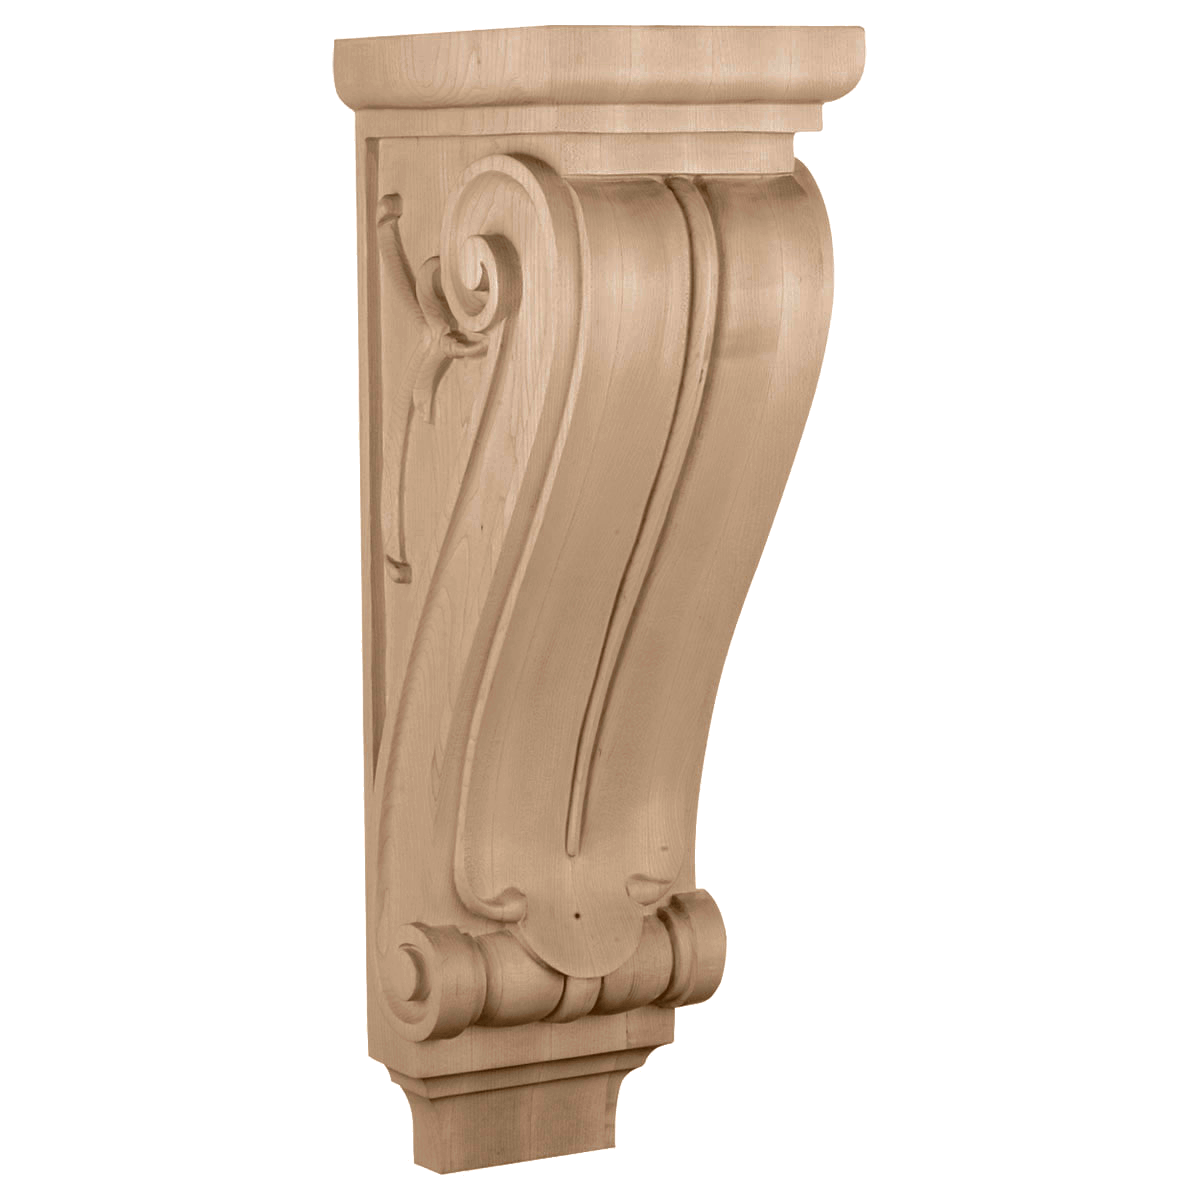 CORCL8 large classical corbel